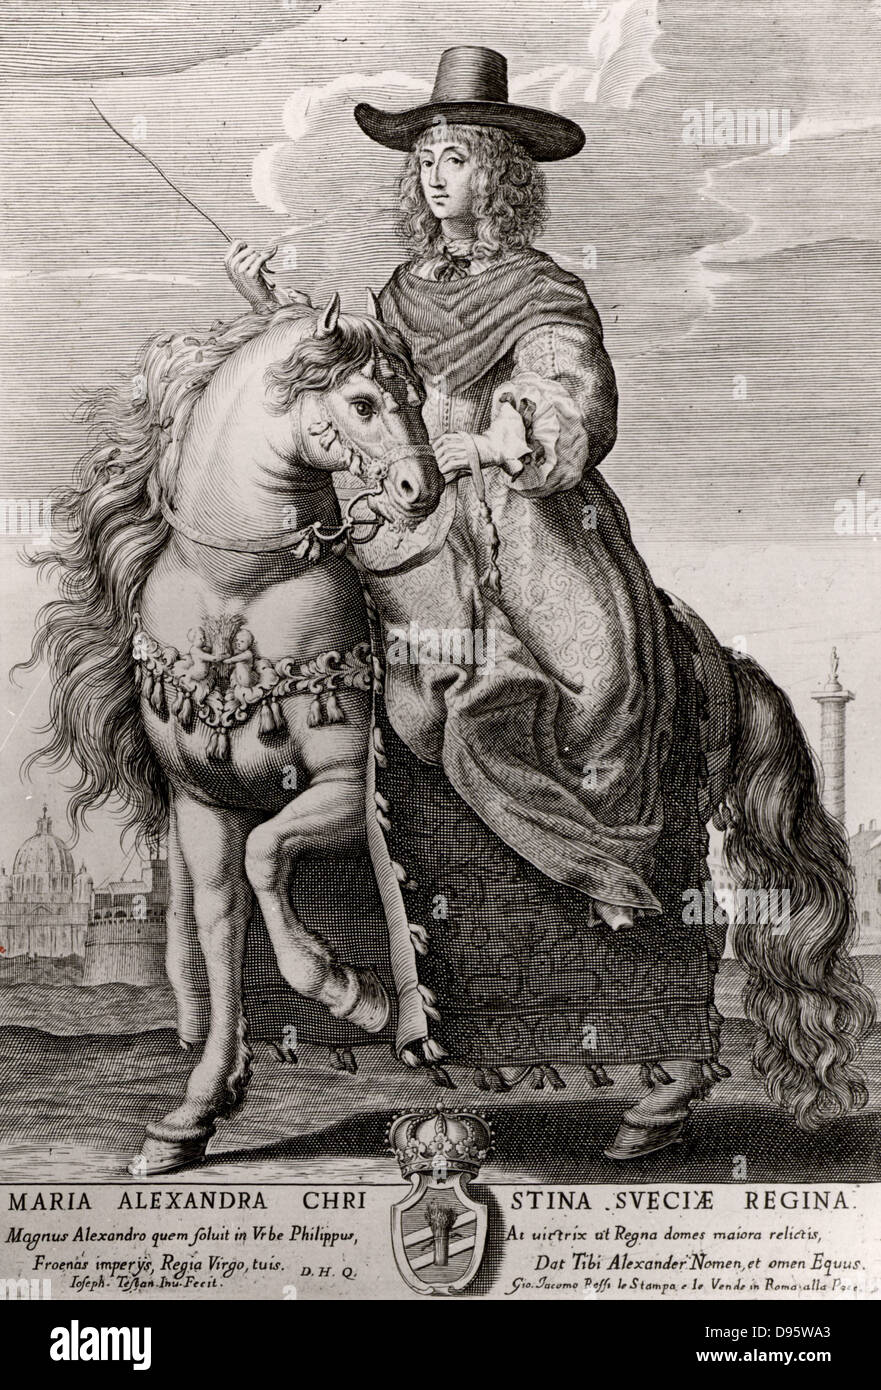 Queen Christina of Sweden (1626-1689). Succeeded to the throne in 1632. Abdicated in 1654 so that she could practice her Roman Catholic faith to which she had converted, Sweden being a Protestant country.  Engraving of Christina on horseback in Rome under her new name, Maria Christina Alexandra. Stock Photo